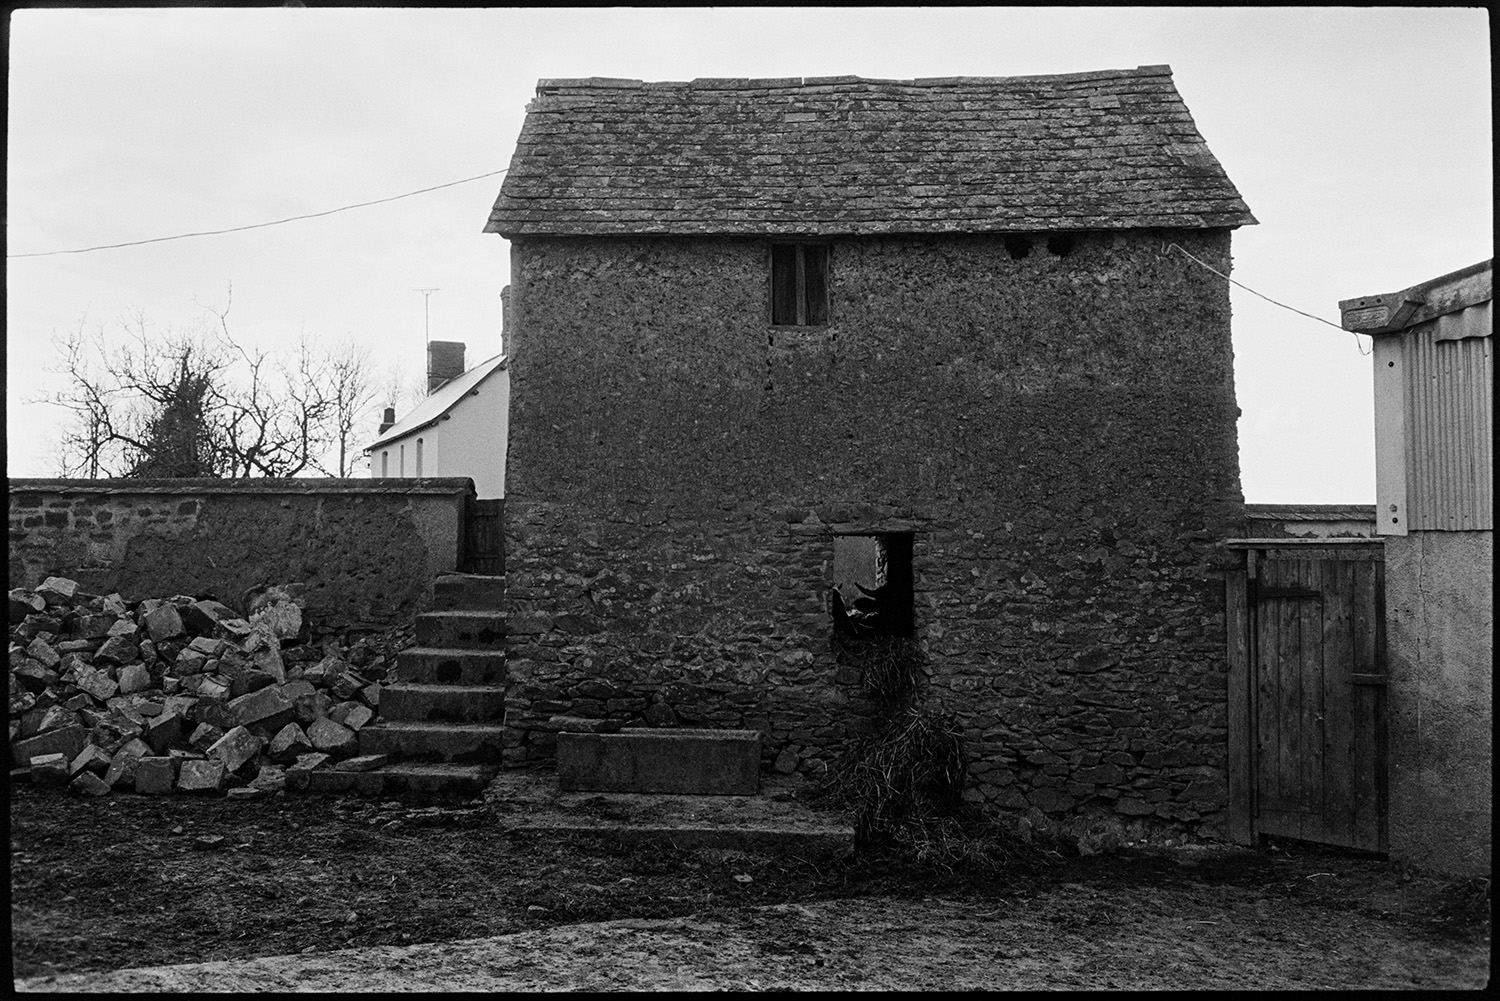 Cows, barns, woodpile. 
[The farmyard at Parsonage, Iddesleigh with a stone, cob and tiled barn. A pile of stone or rubble is visible in the farmyard.]